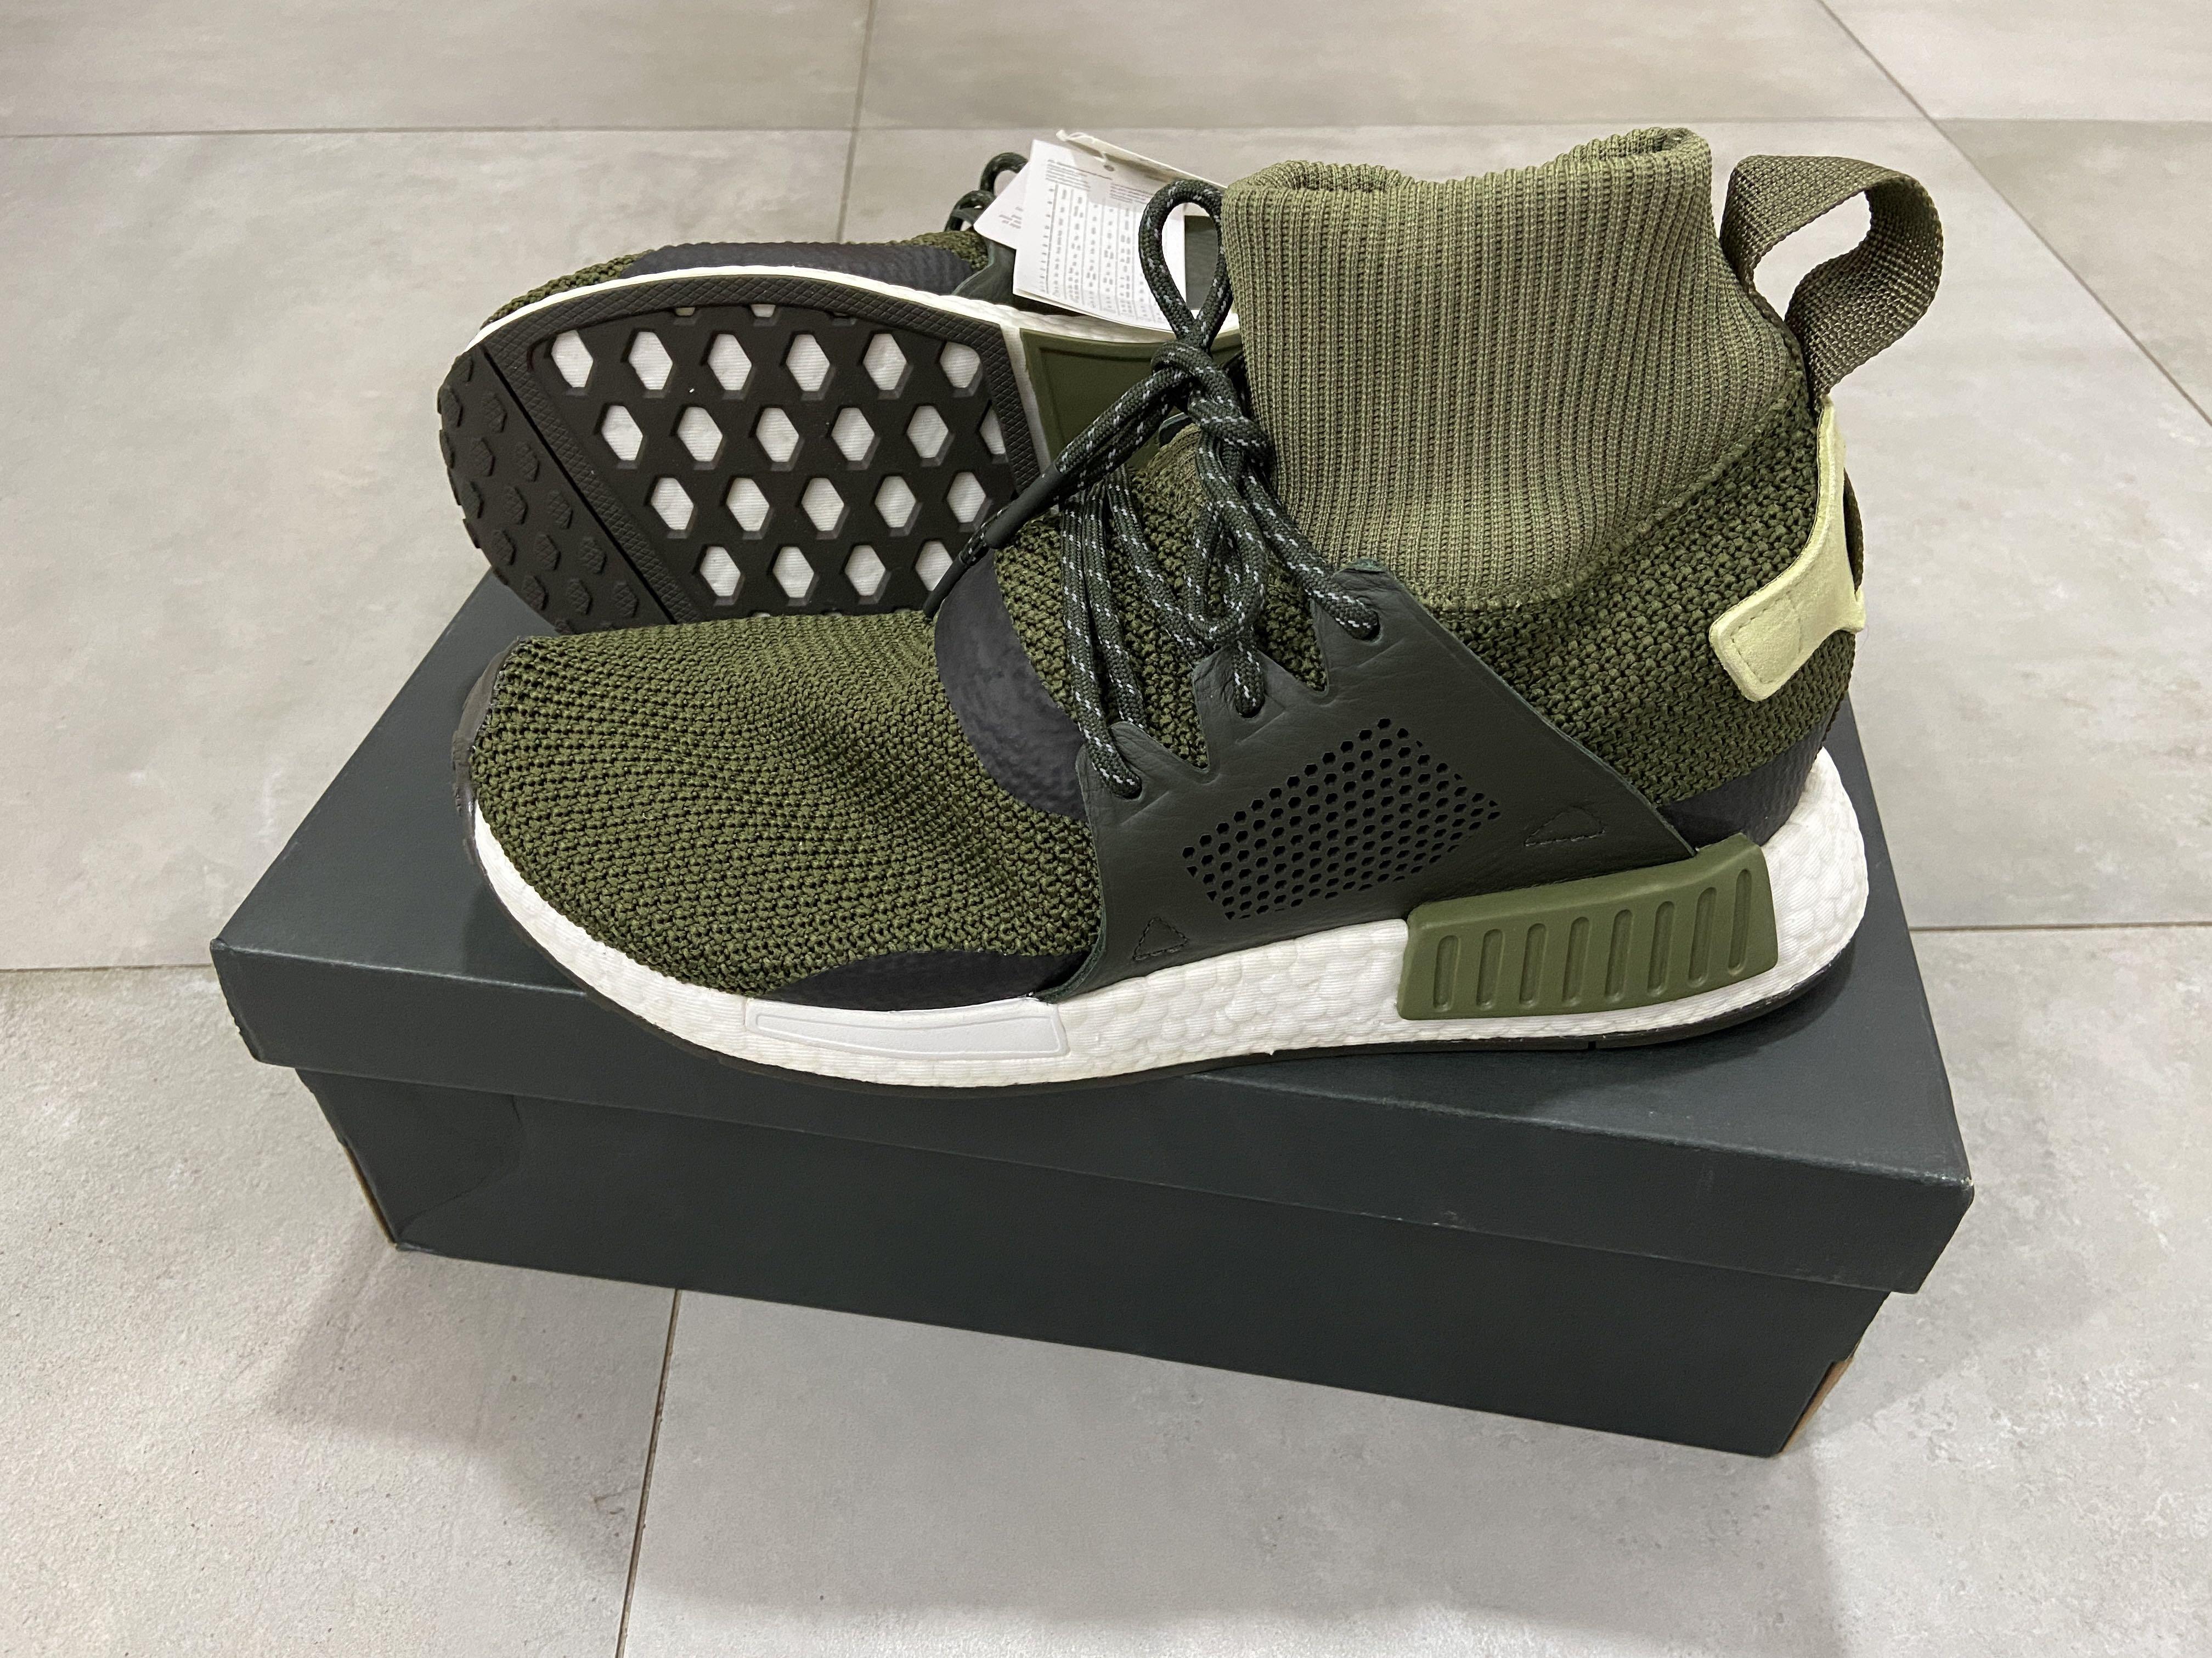 ADIDAS NMD R1 WINTER OLIVE GREEN, Men's Fashion, Footwear, on Carousell